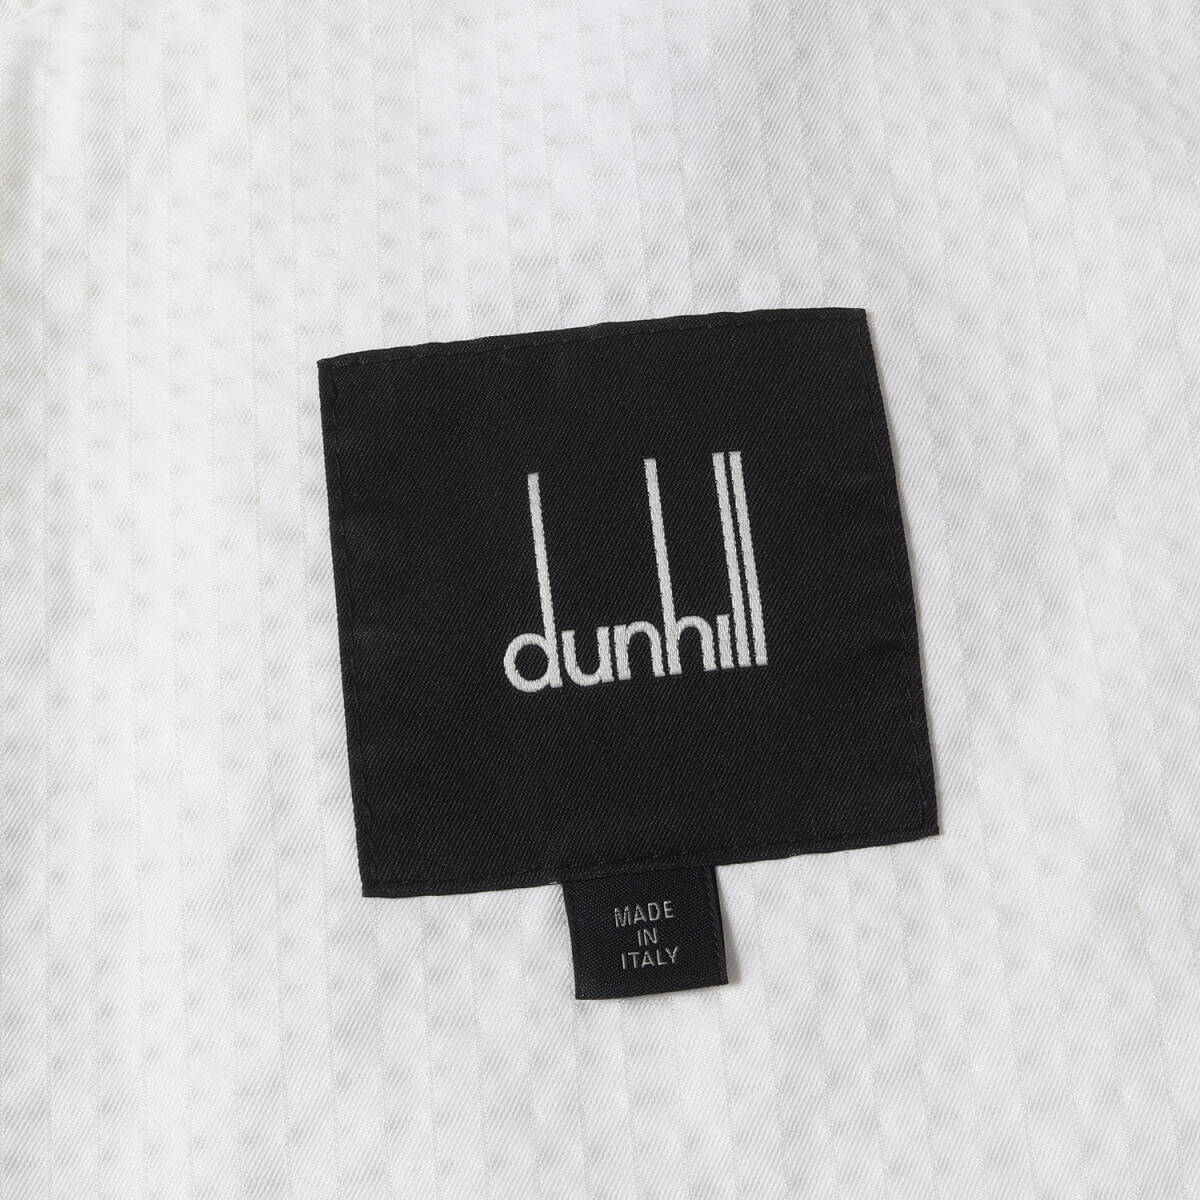 dunhill Dunhill coat size :M 23SSf- dead stripe embroidery check double Zip coat /moz white Italy made 